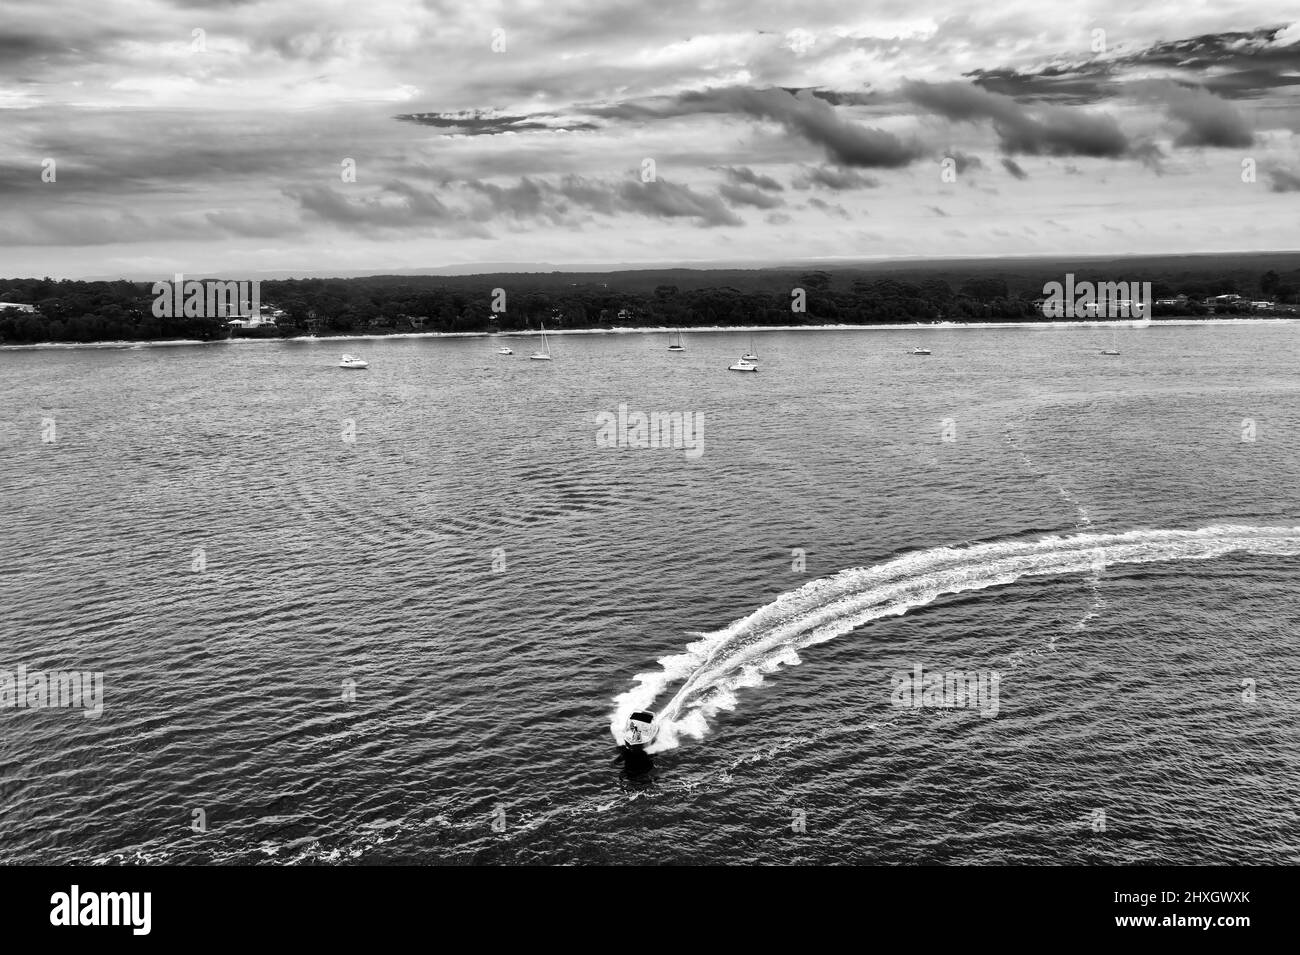 Speed motor boat on Jervis bay surface leaving trail as seen from above against Vincentia town. Stock Photo